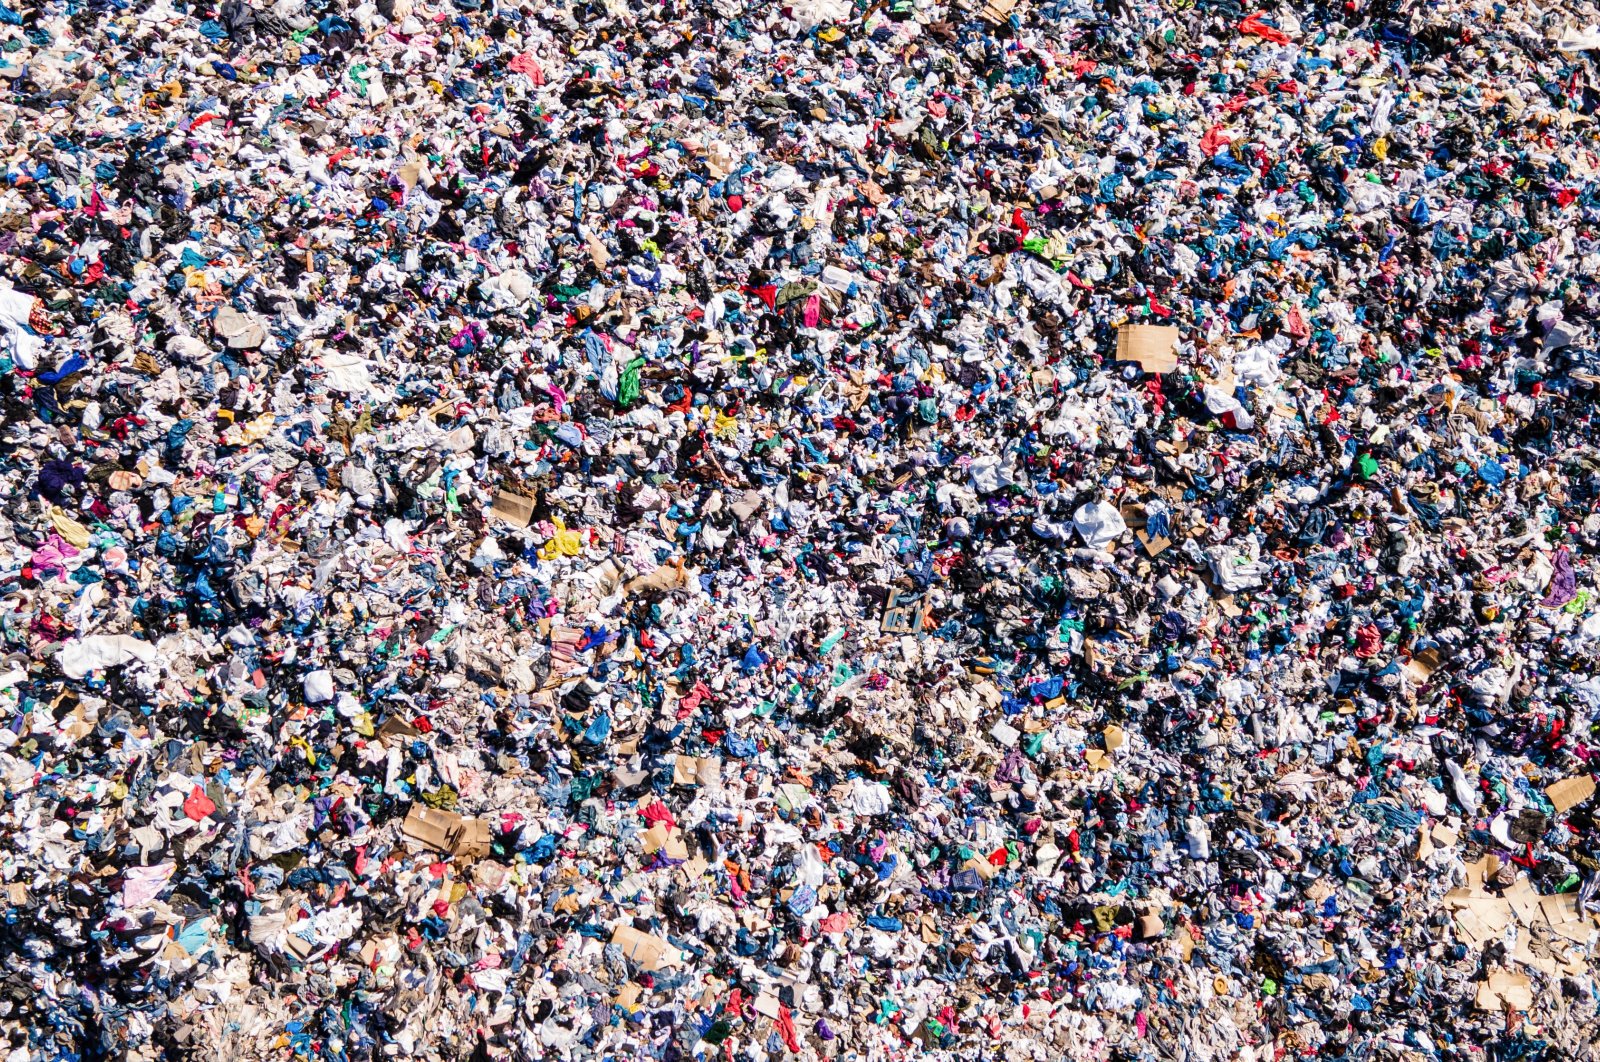 An aerial view of used clothes discarded in the Atacama desert, in Alto Hospicio, Chile, Nov. 25, 2021. (Photo by Getty Images)